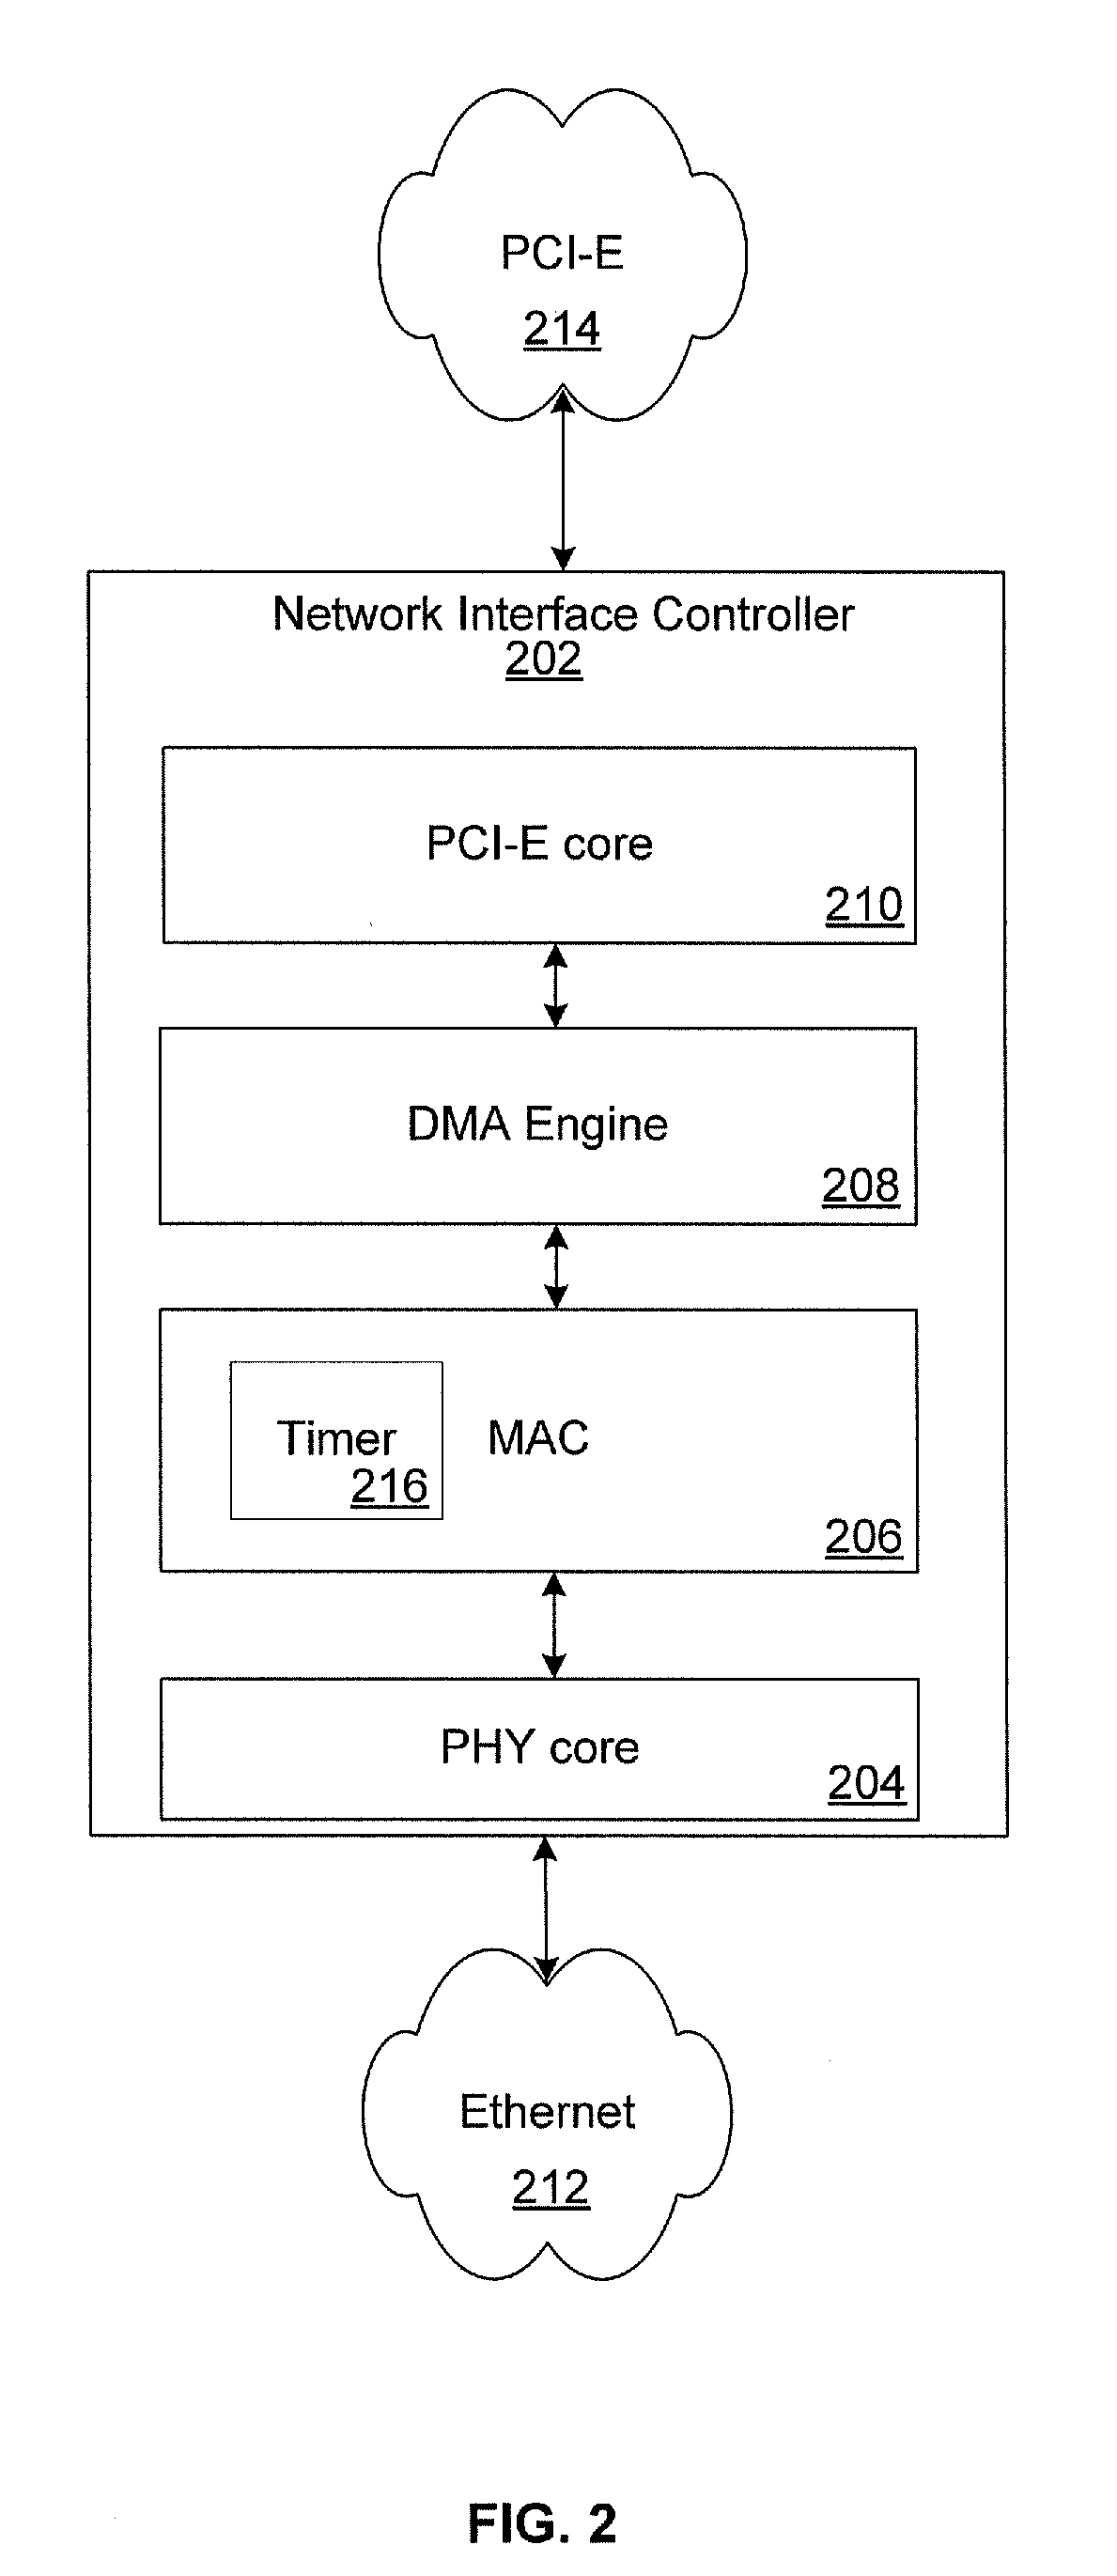 Method and System for Optimized Power Management for a Network Device Supporting PCI-E and Energy Efficient Ethernet